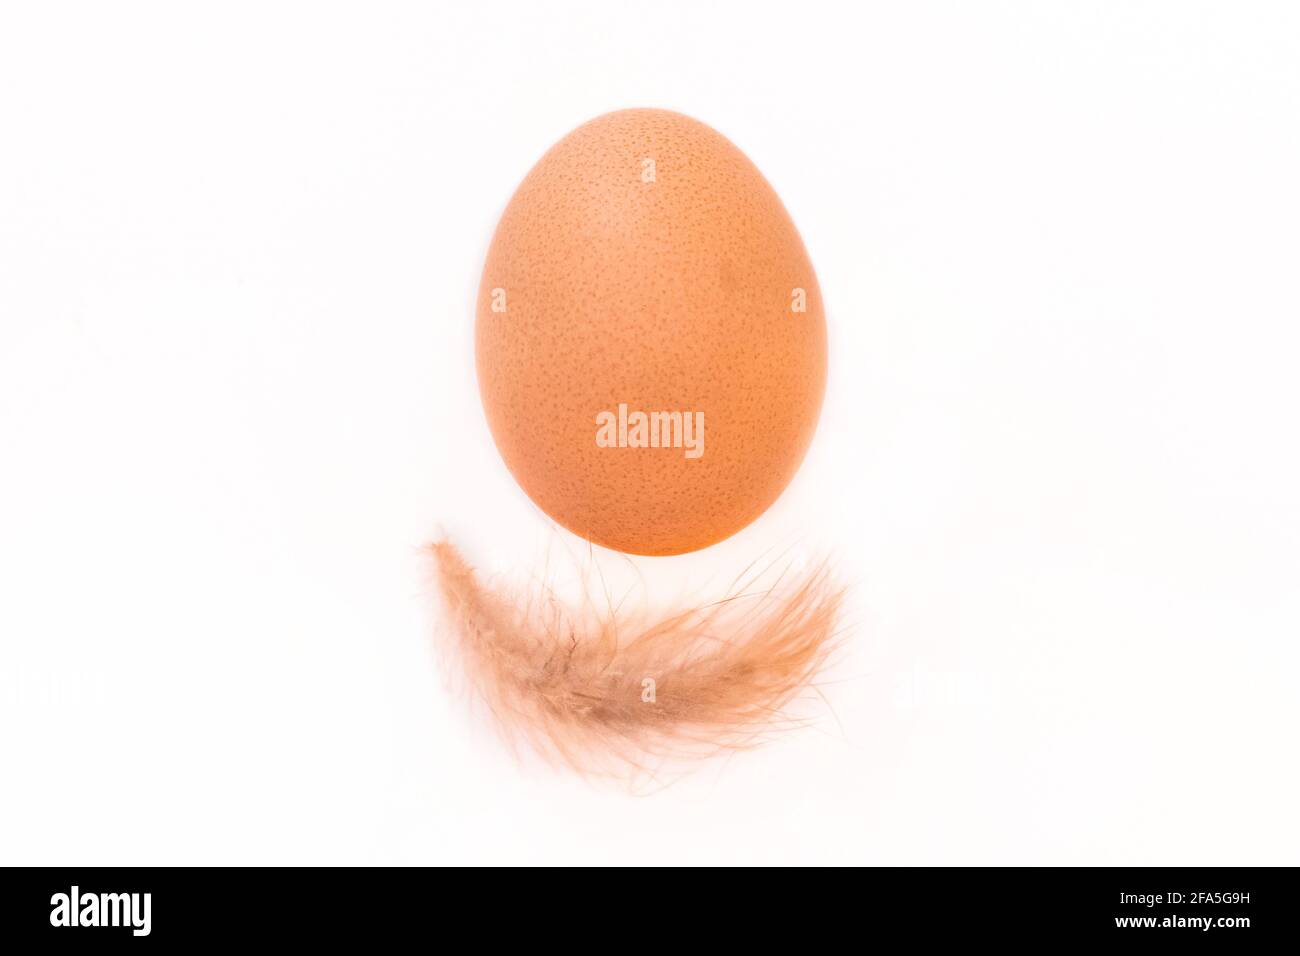 Brown chicken egg and small fluffy feather of chicken on white background, isolated. Stock Photo